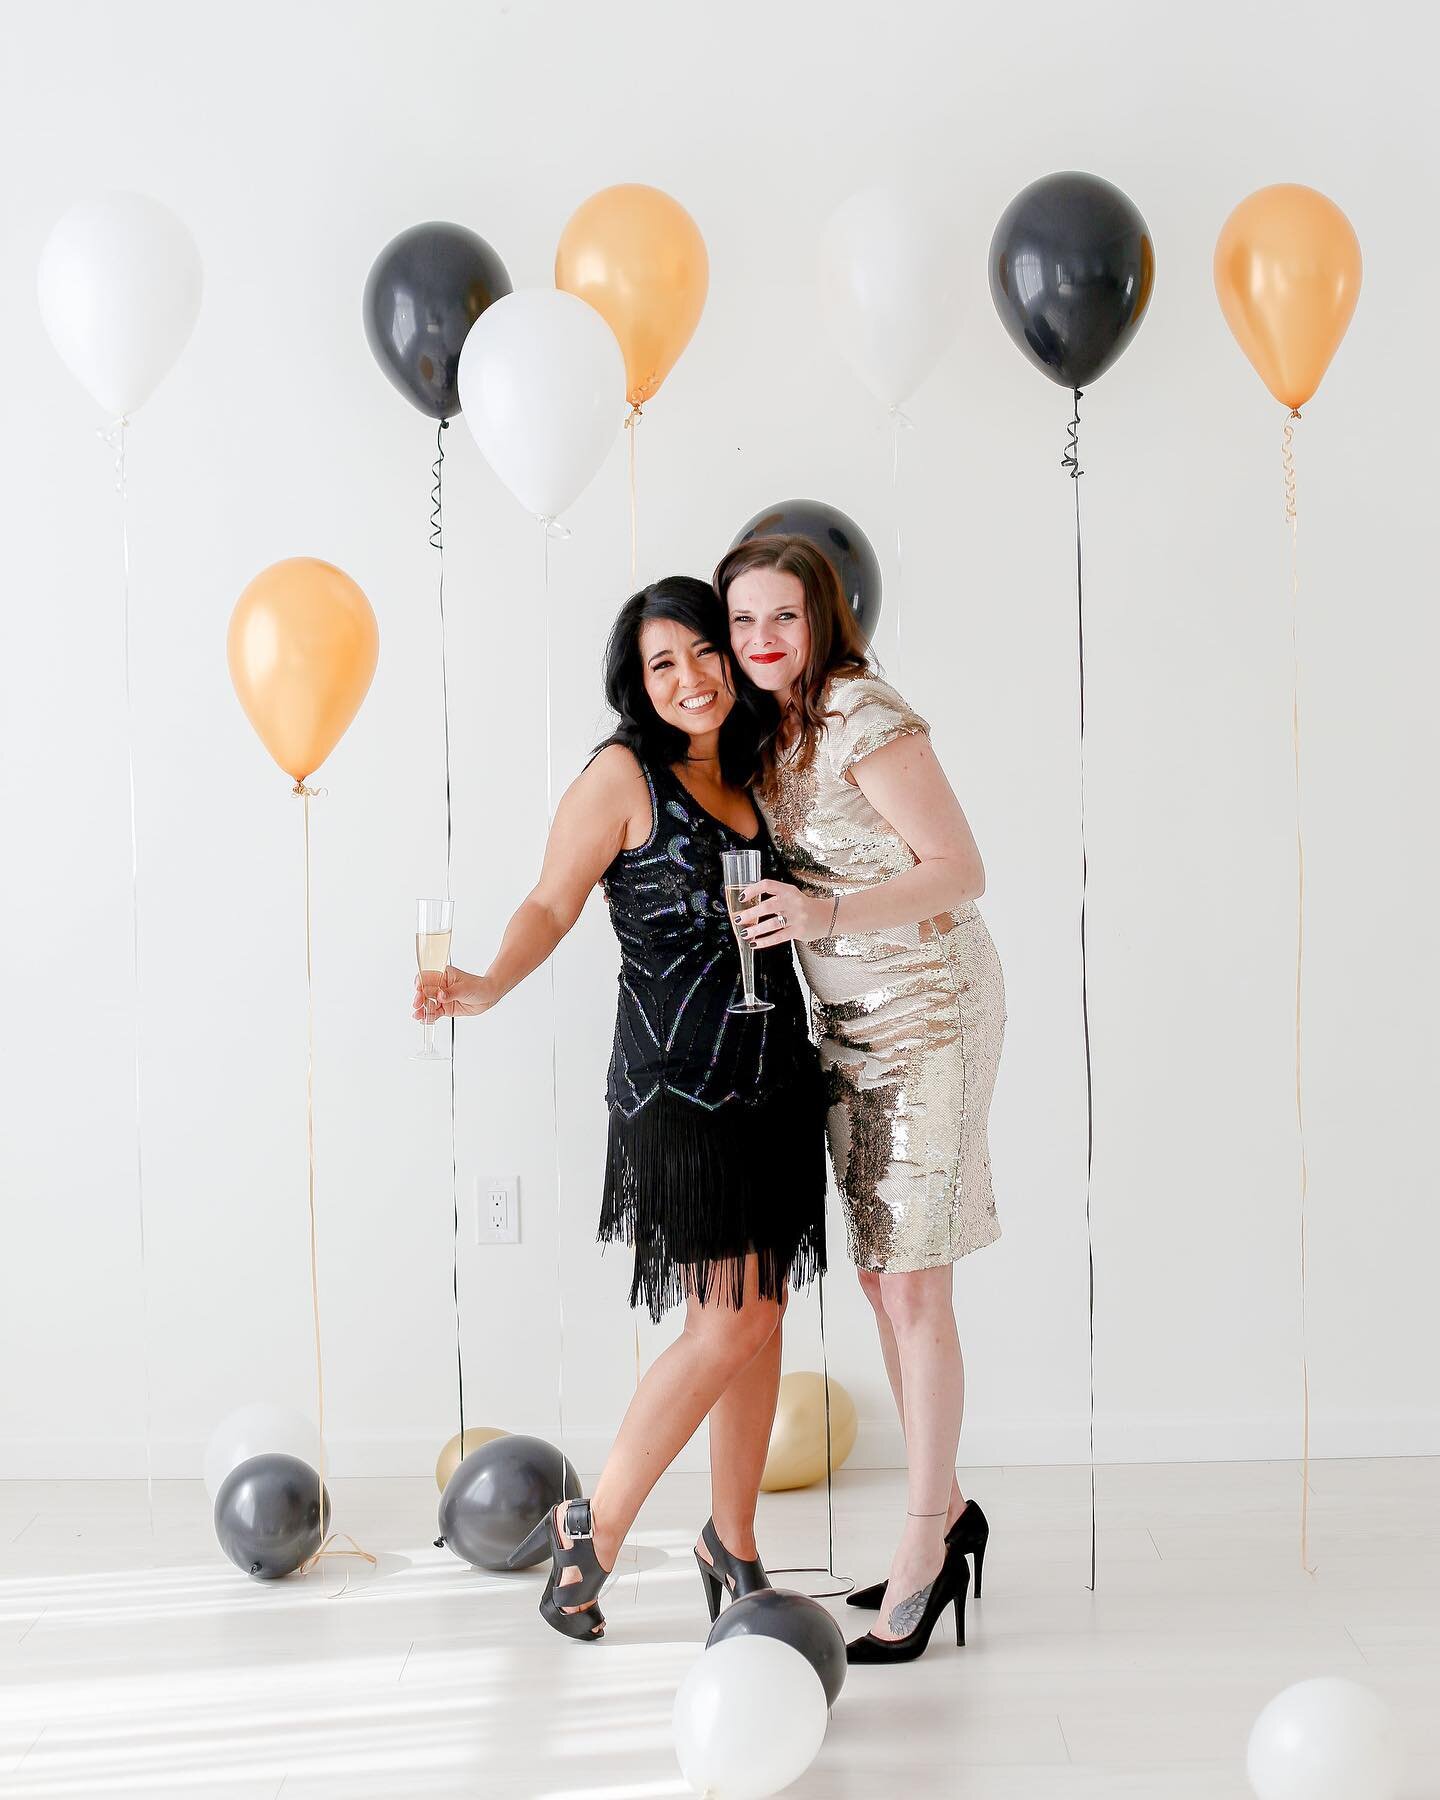 Did you know that you can be ANY age to have birthday/celebration photos done? Yup! All it takes is a few balloons, some sparkly and good music blasting to make fun memories!